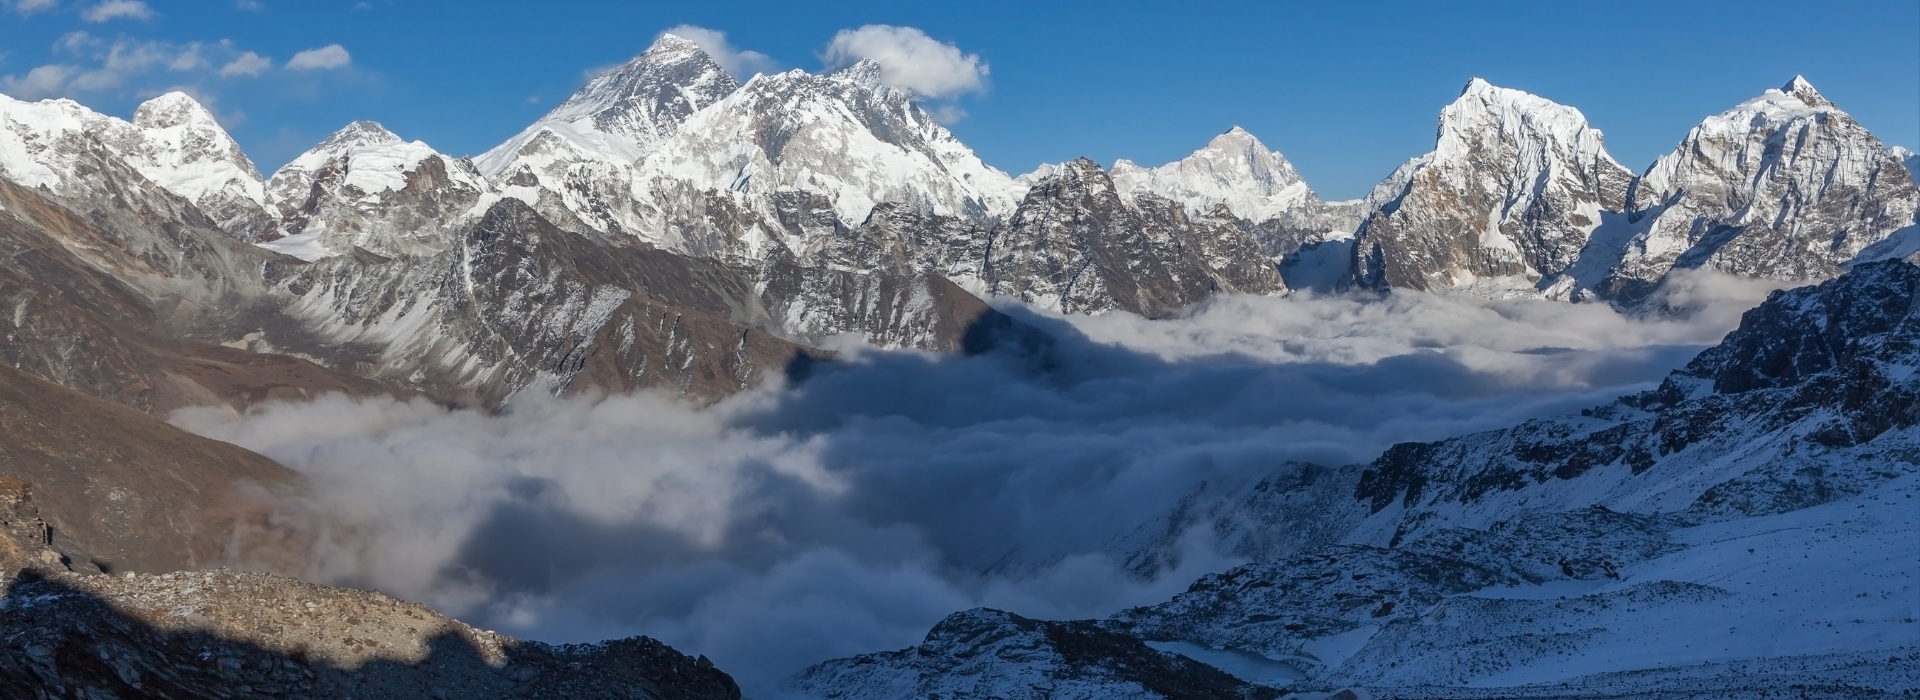 View of Mount Everest from Renjo La Pass, Nepal.